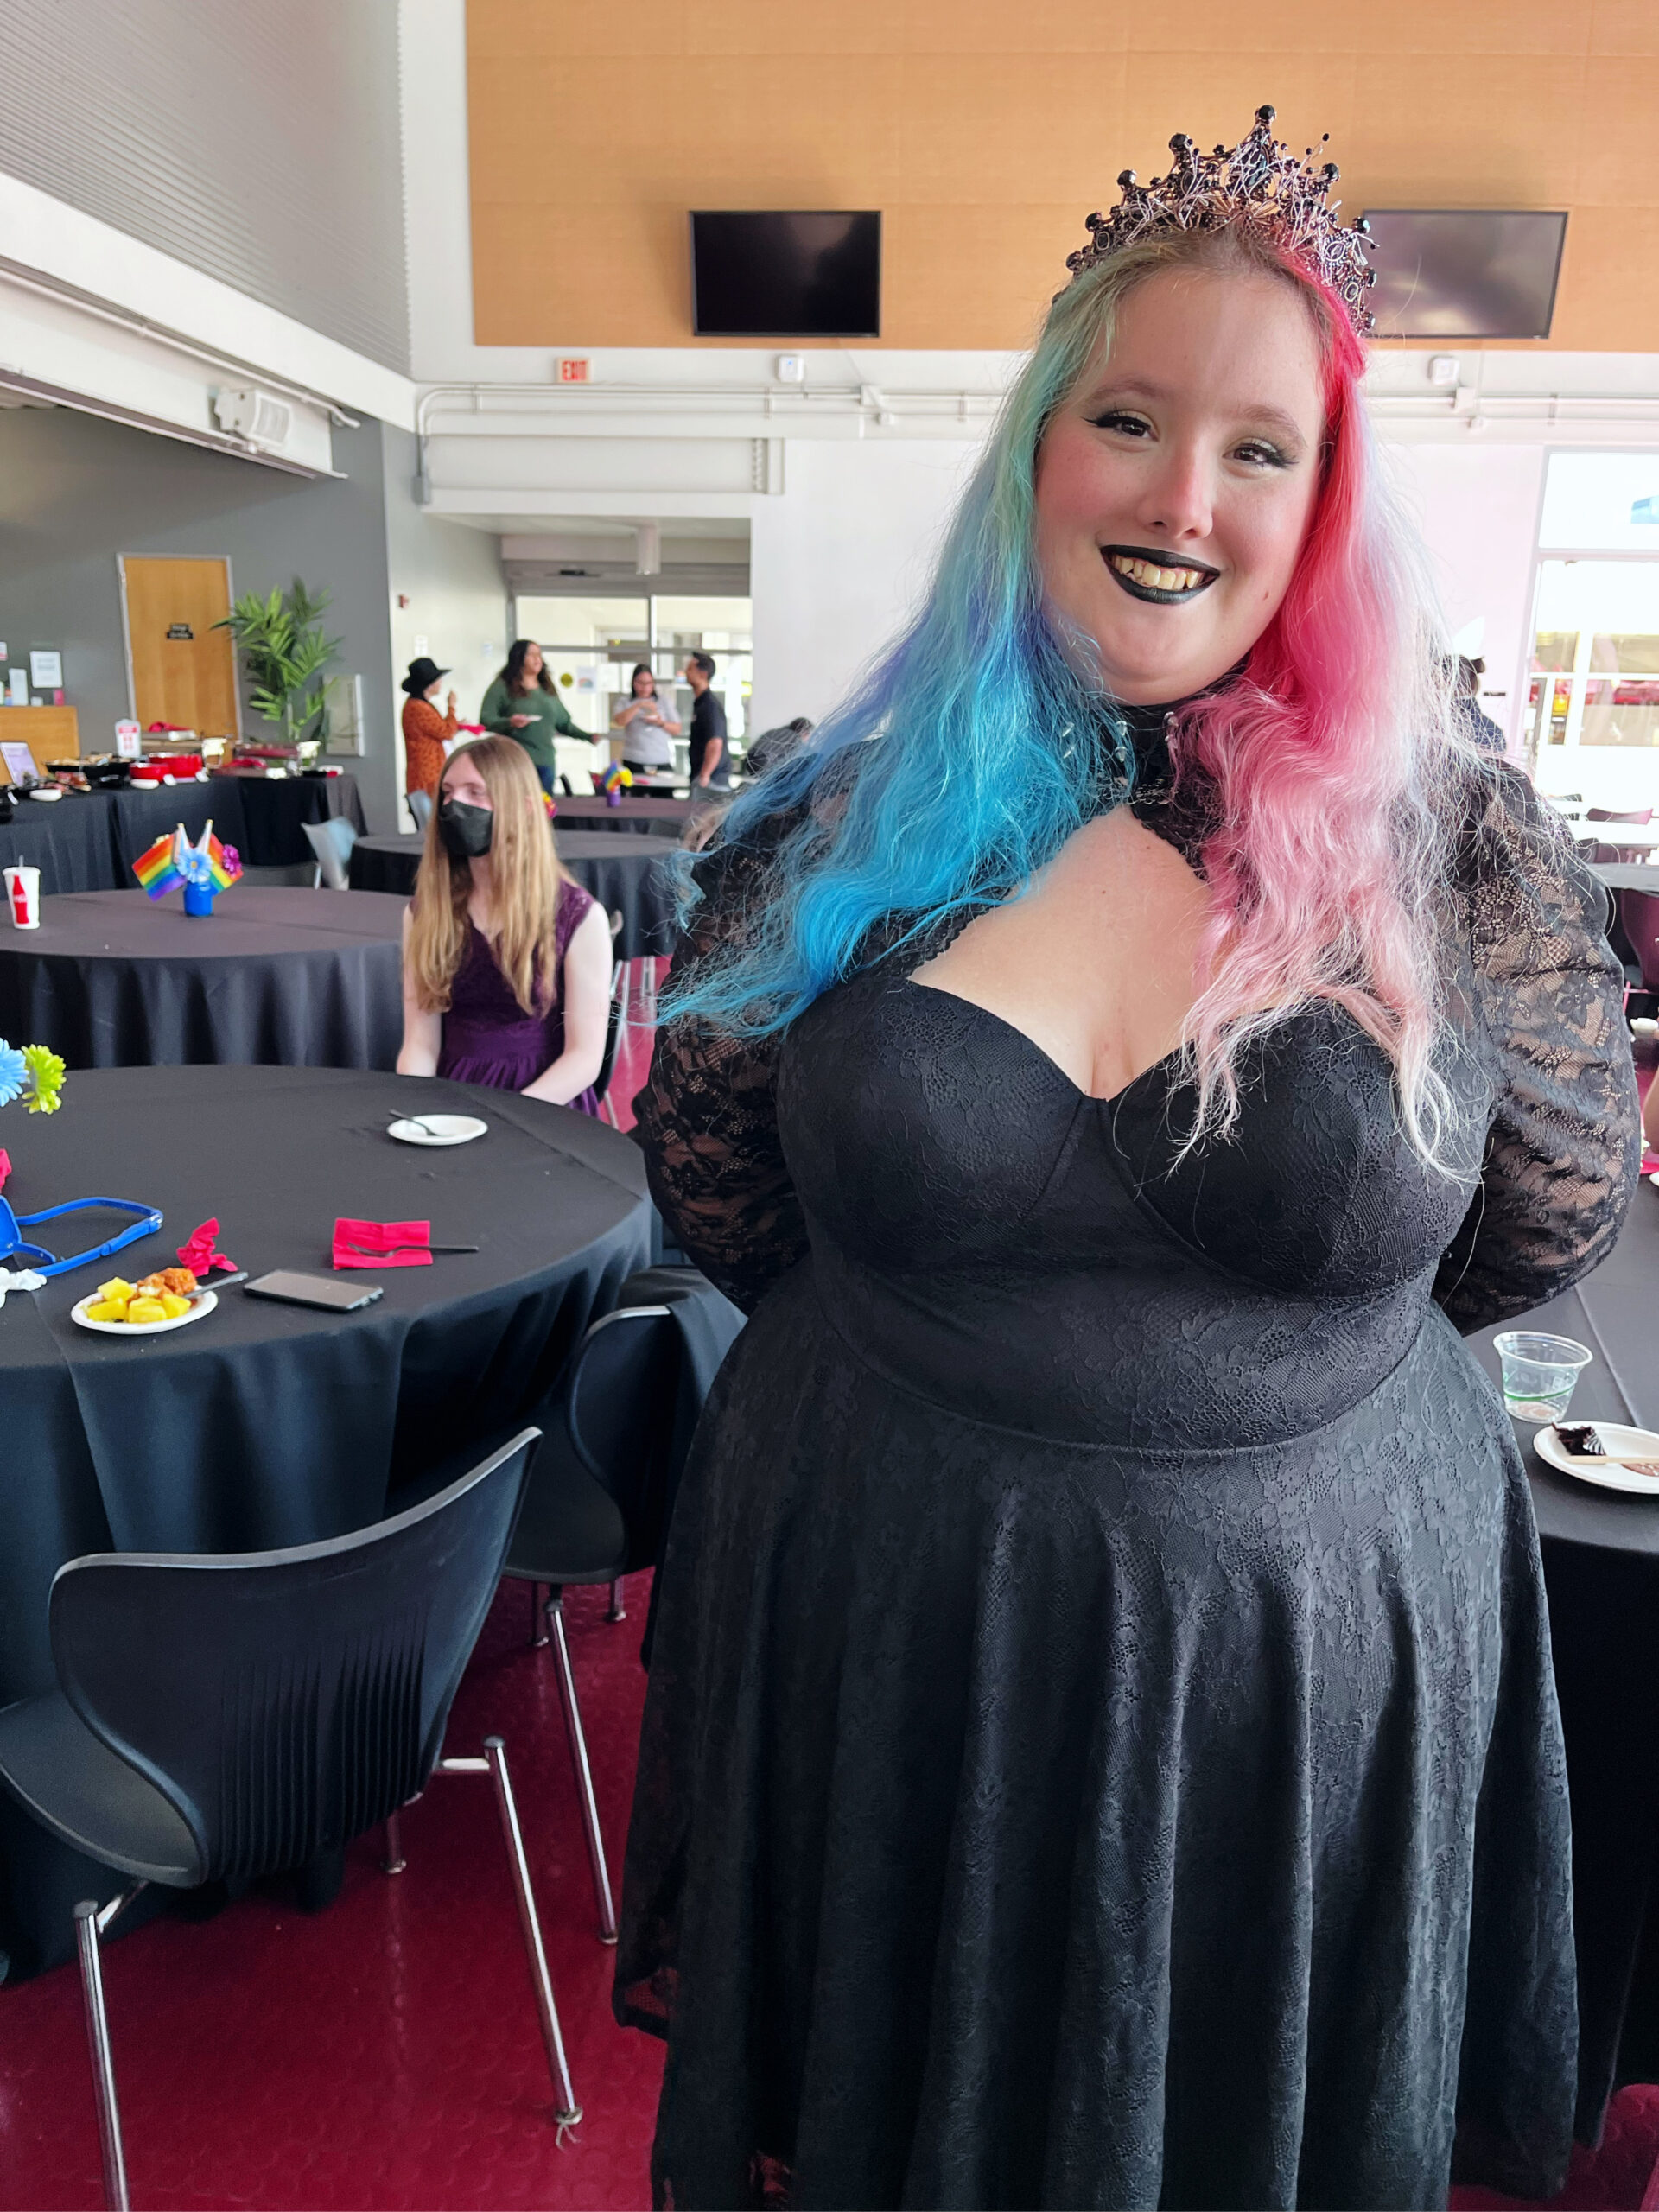 Brooke Brodman, a Palomar student and Pride Center member, at the queer prom.